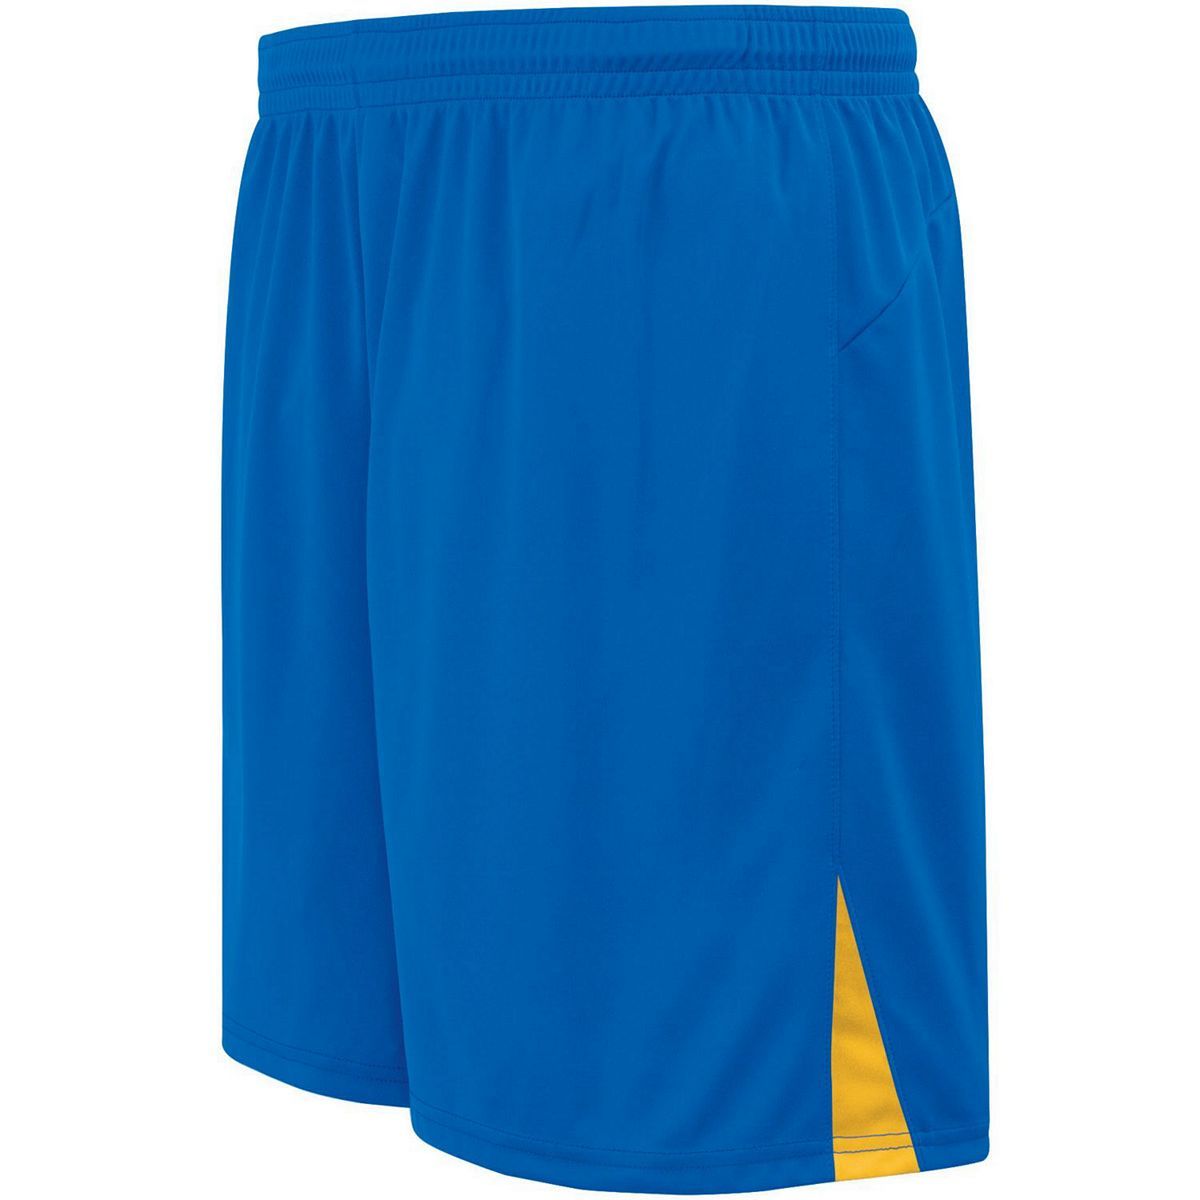 High 5 Ladies Hawk Shorts in Royal/Athletic Gold  -Part of the Ladies, Ladies-Shorts, High5-Products, Soccer, All-Sports-1 product lines at KanaleyCreations.com